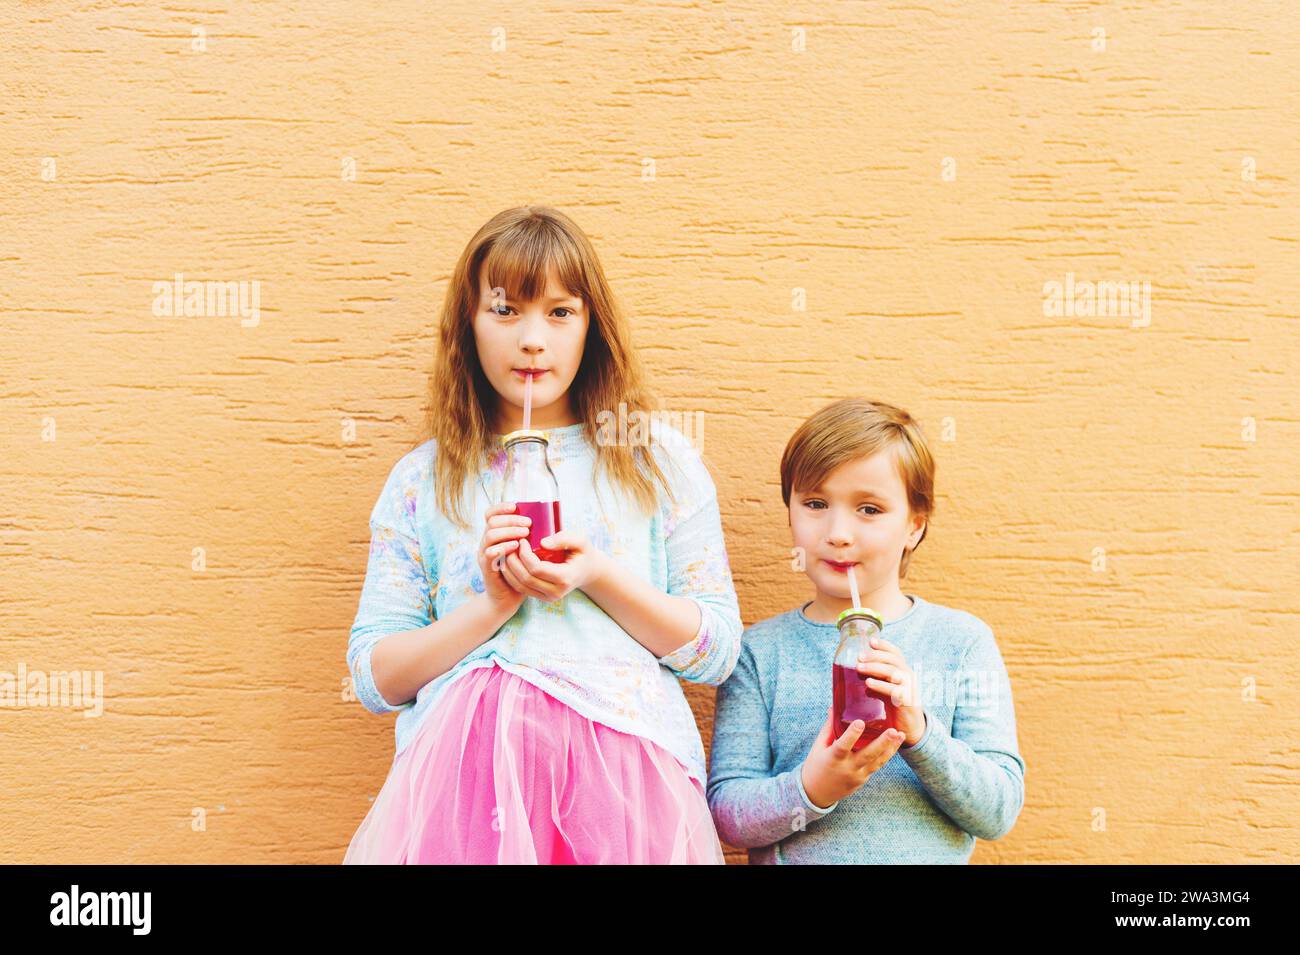 Outdoor portrait of two funny fashion kids, holding drinks, wearing blue and pink clothes Stock Photo